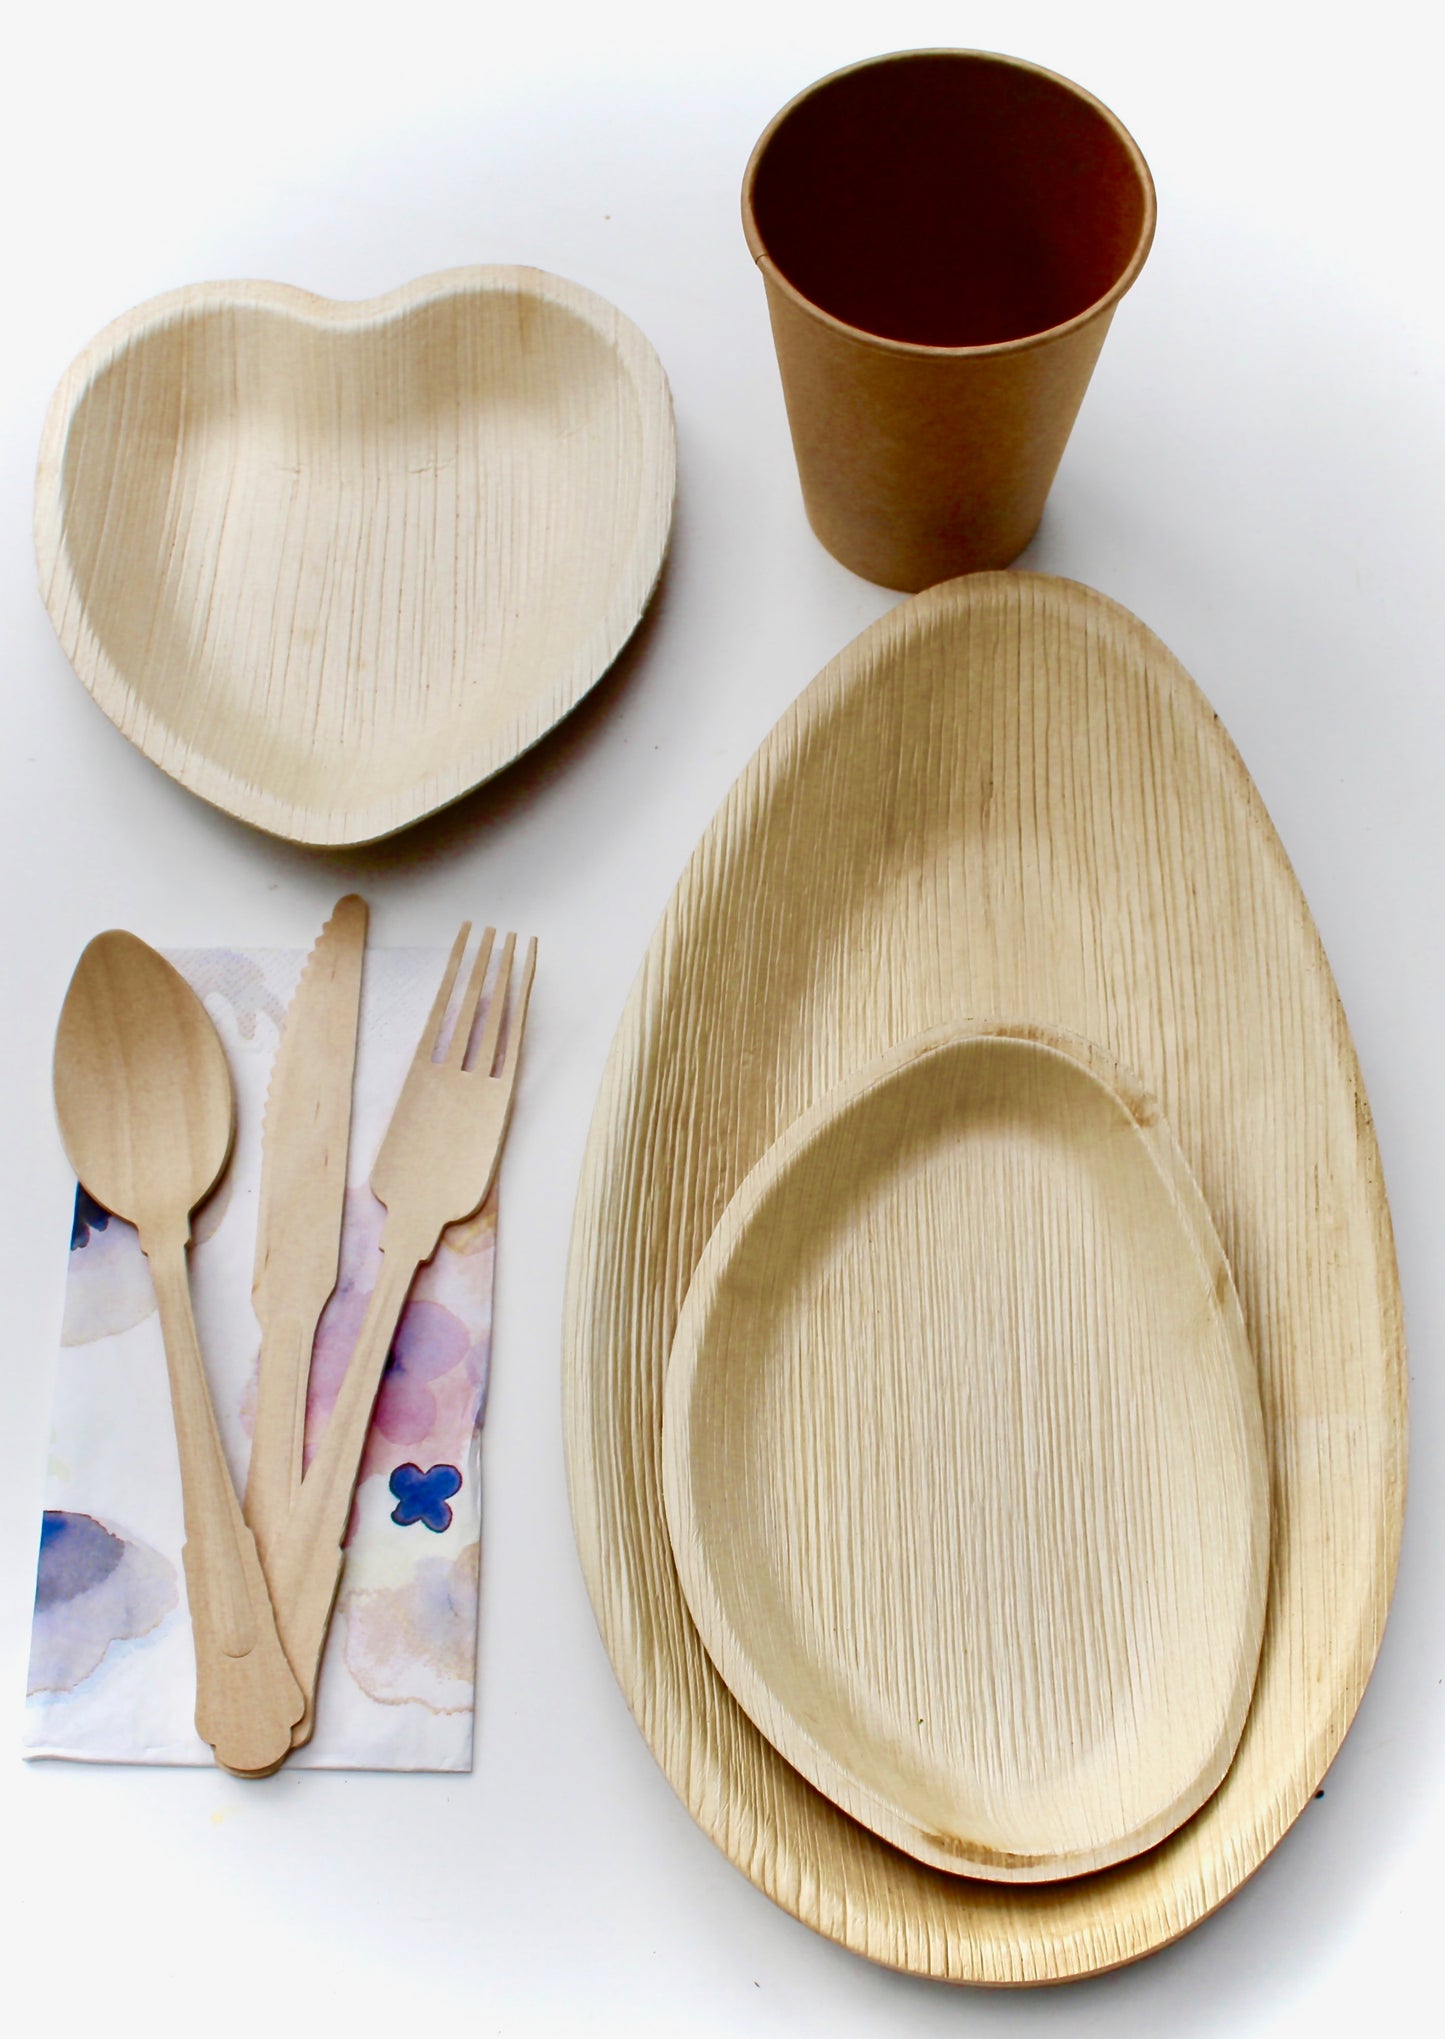 palm leaf plates 10 pice 6x9" try angle  deep   - 10 pic 5" Bowl - 10 pic Heart 6" -10 pic Coup - 20 pic Napkin     30  pic cutler - 50 pic napkin